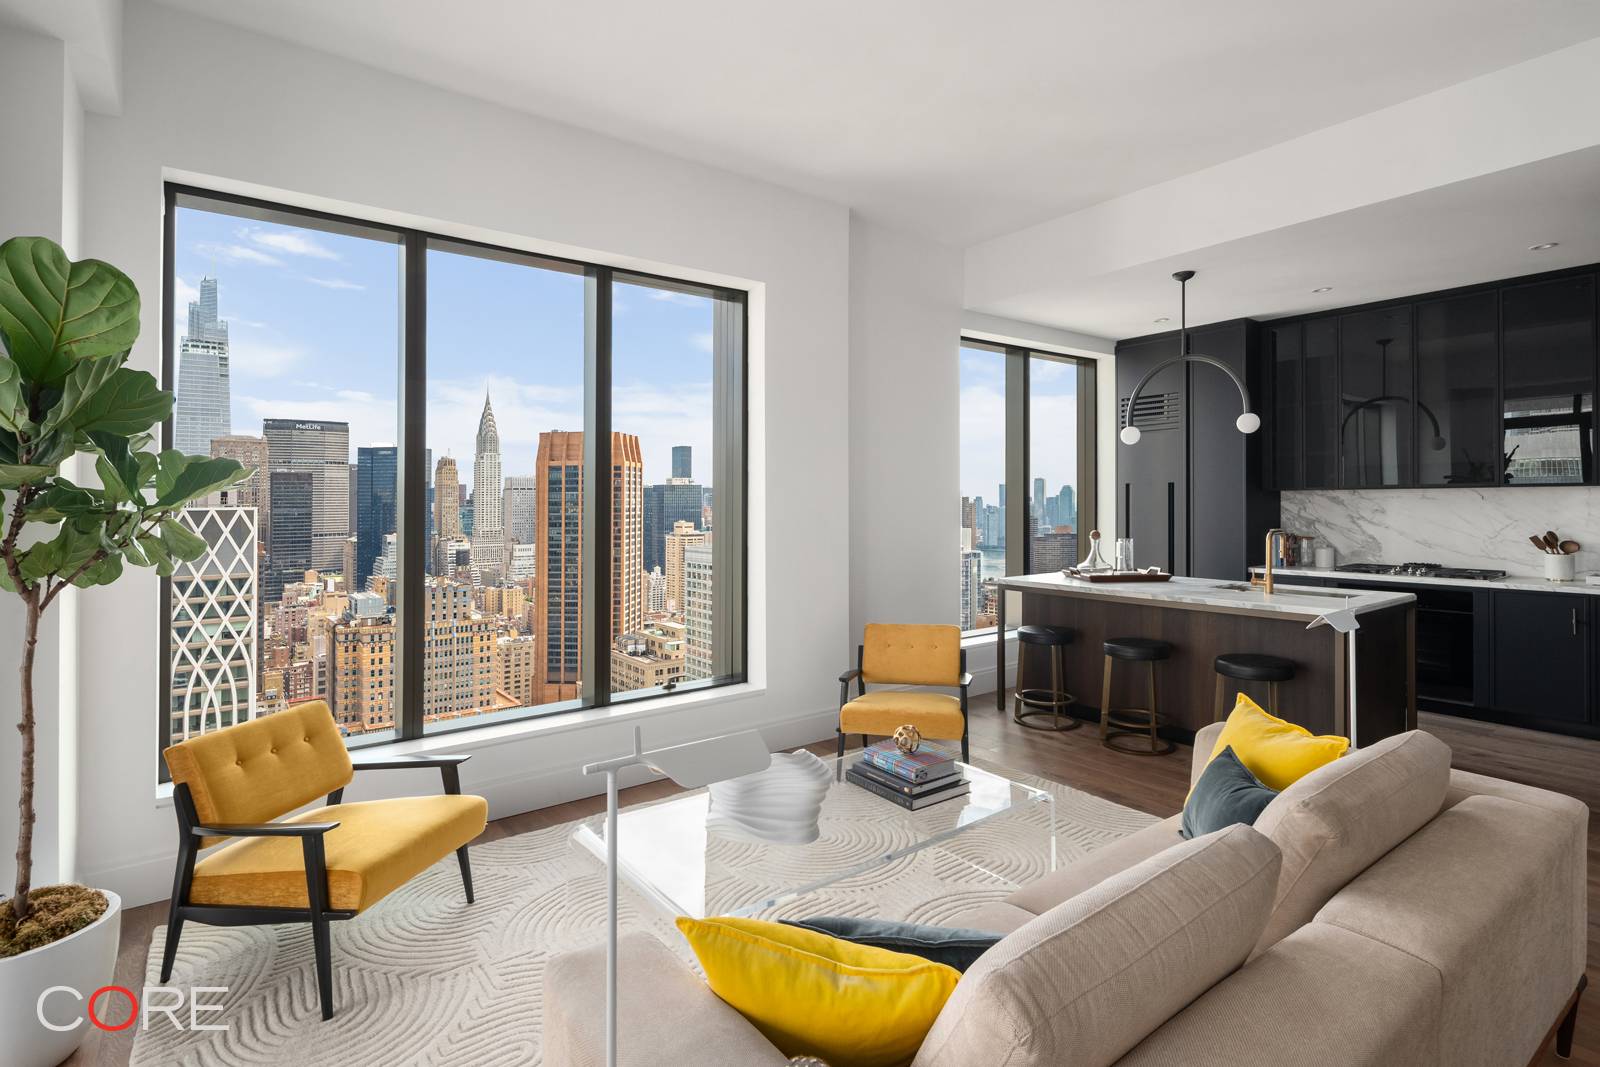 Private In Person amp ; Virtual Appointments Available Immediate Occupancy Rockefeller Group furthers its legacy of pioneering excellence in New York City with Rose Hill, a new residential building.